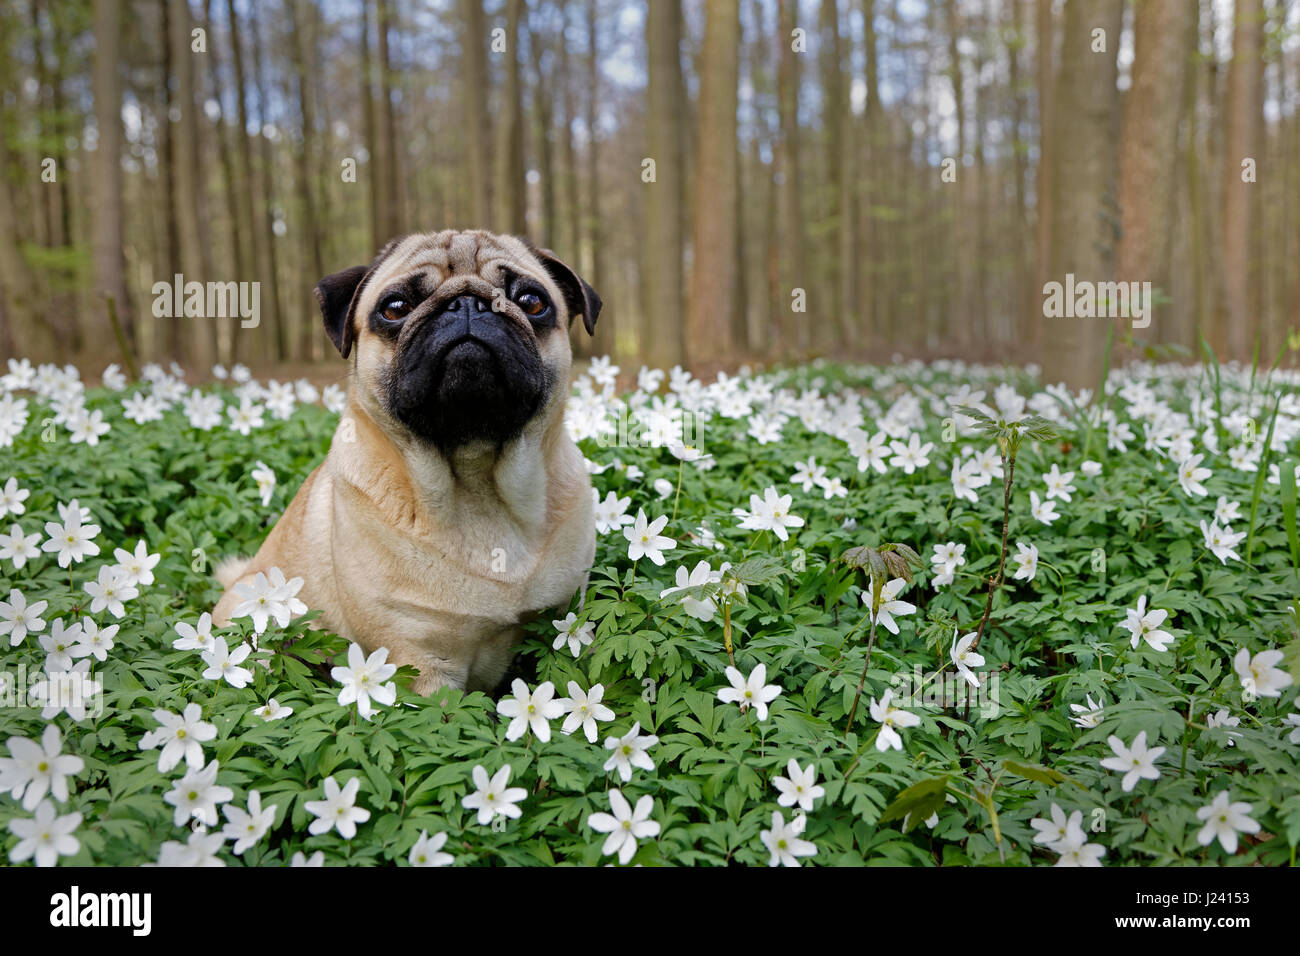 Pug dog sitting in a meadow with wood anemones, Schleswig-Holstein,Germany, Europe Stock Photo